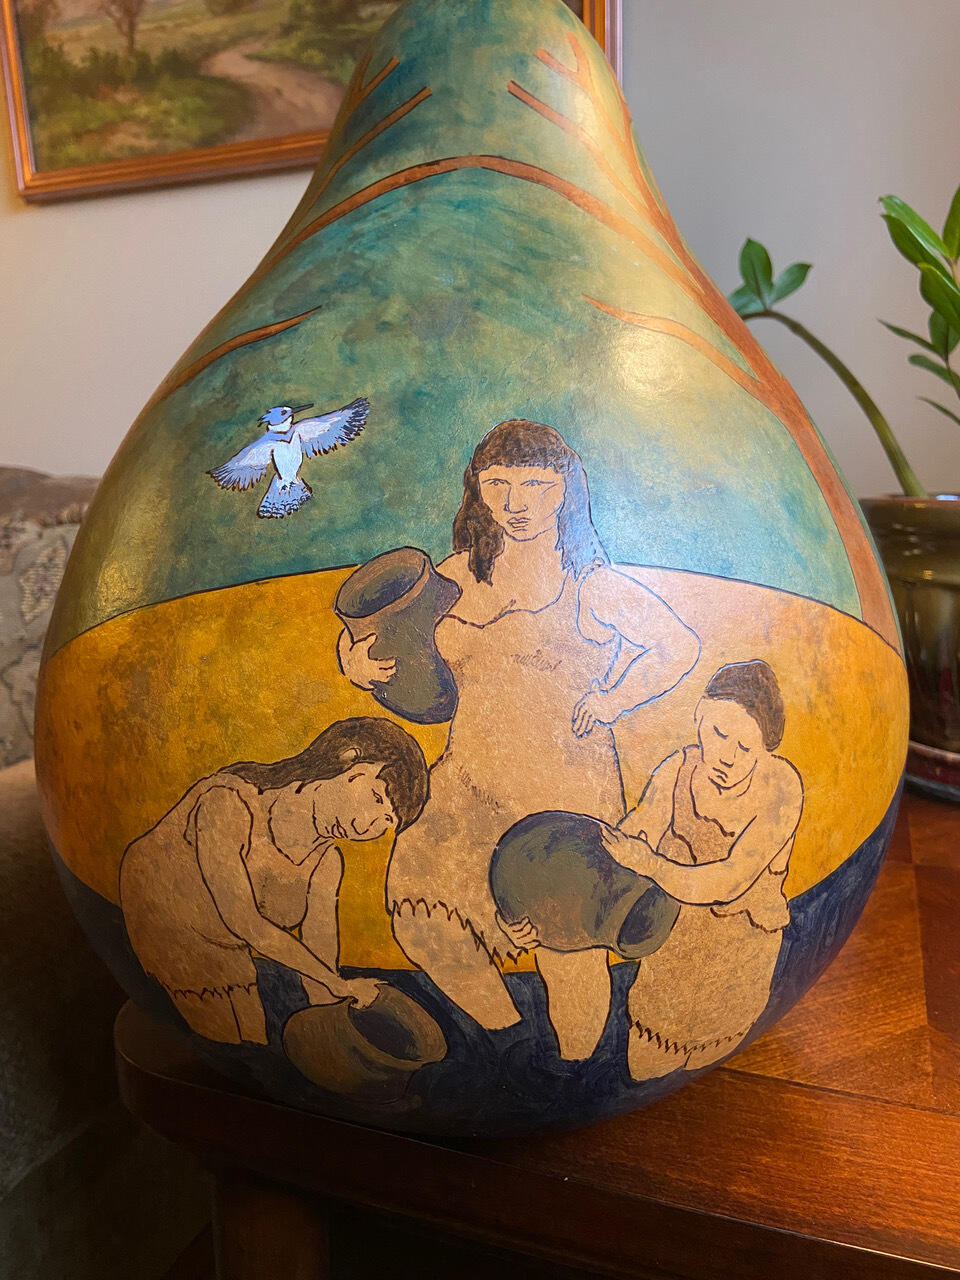 A dried gourd with an image of four women holding bowls standing in water on it. 